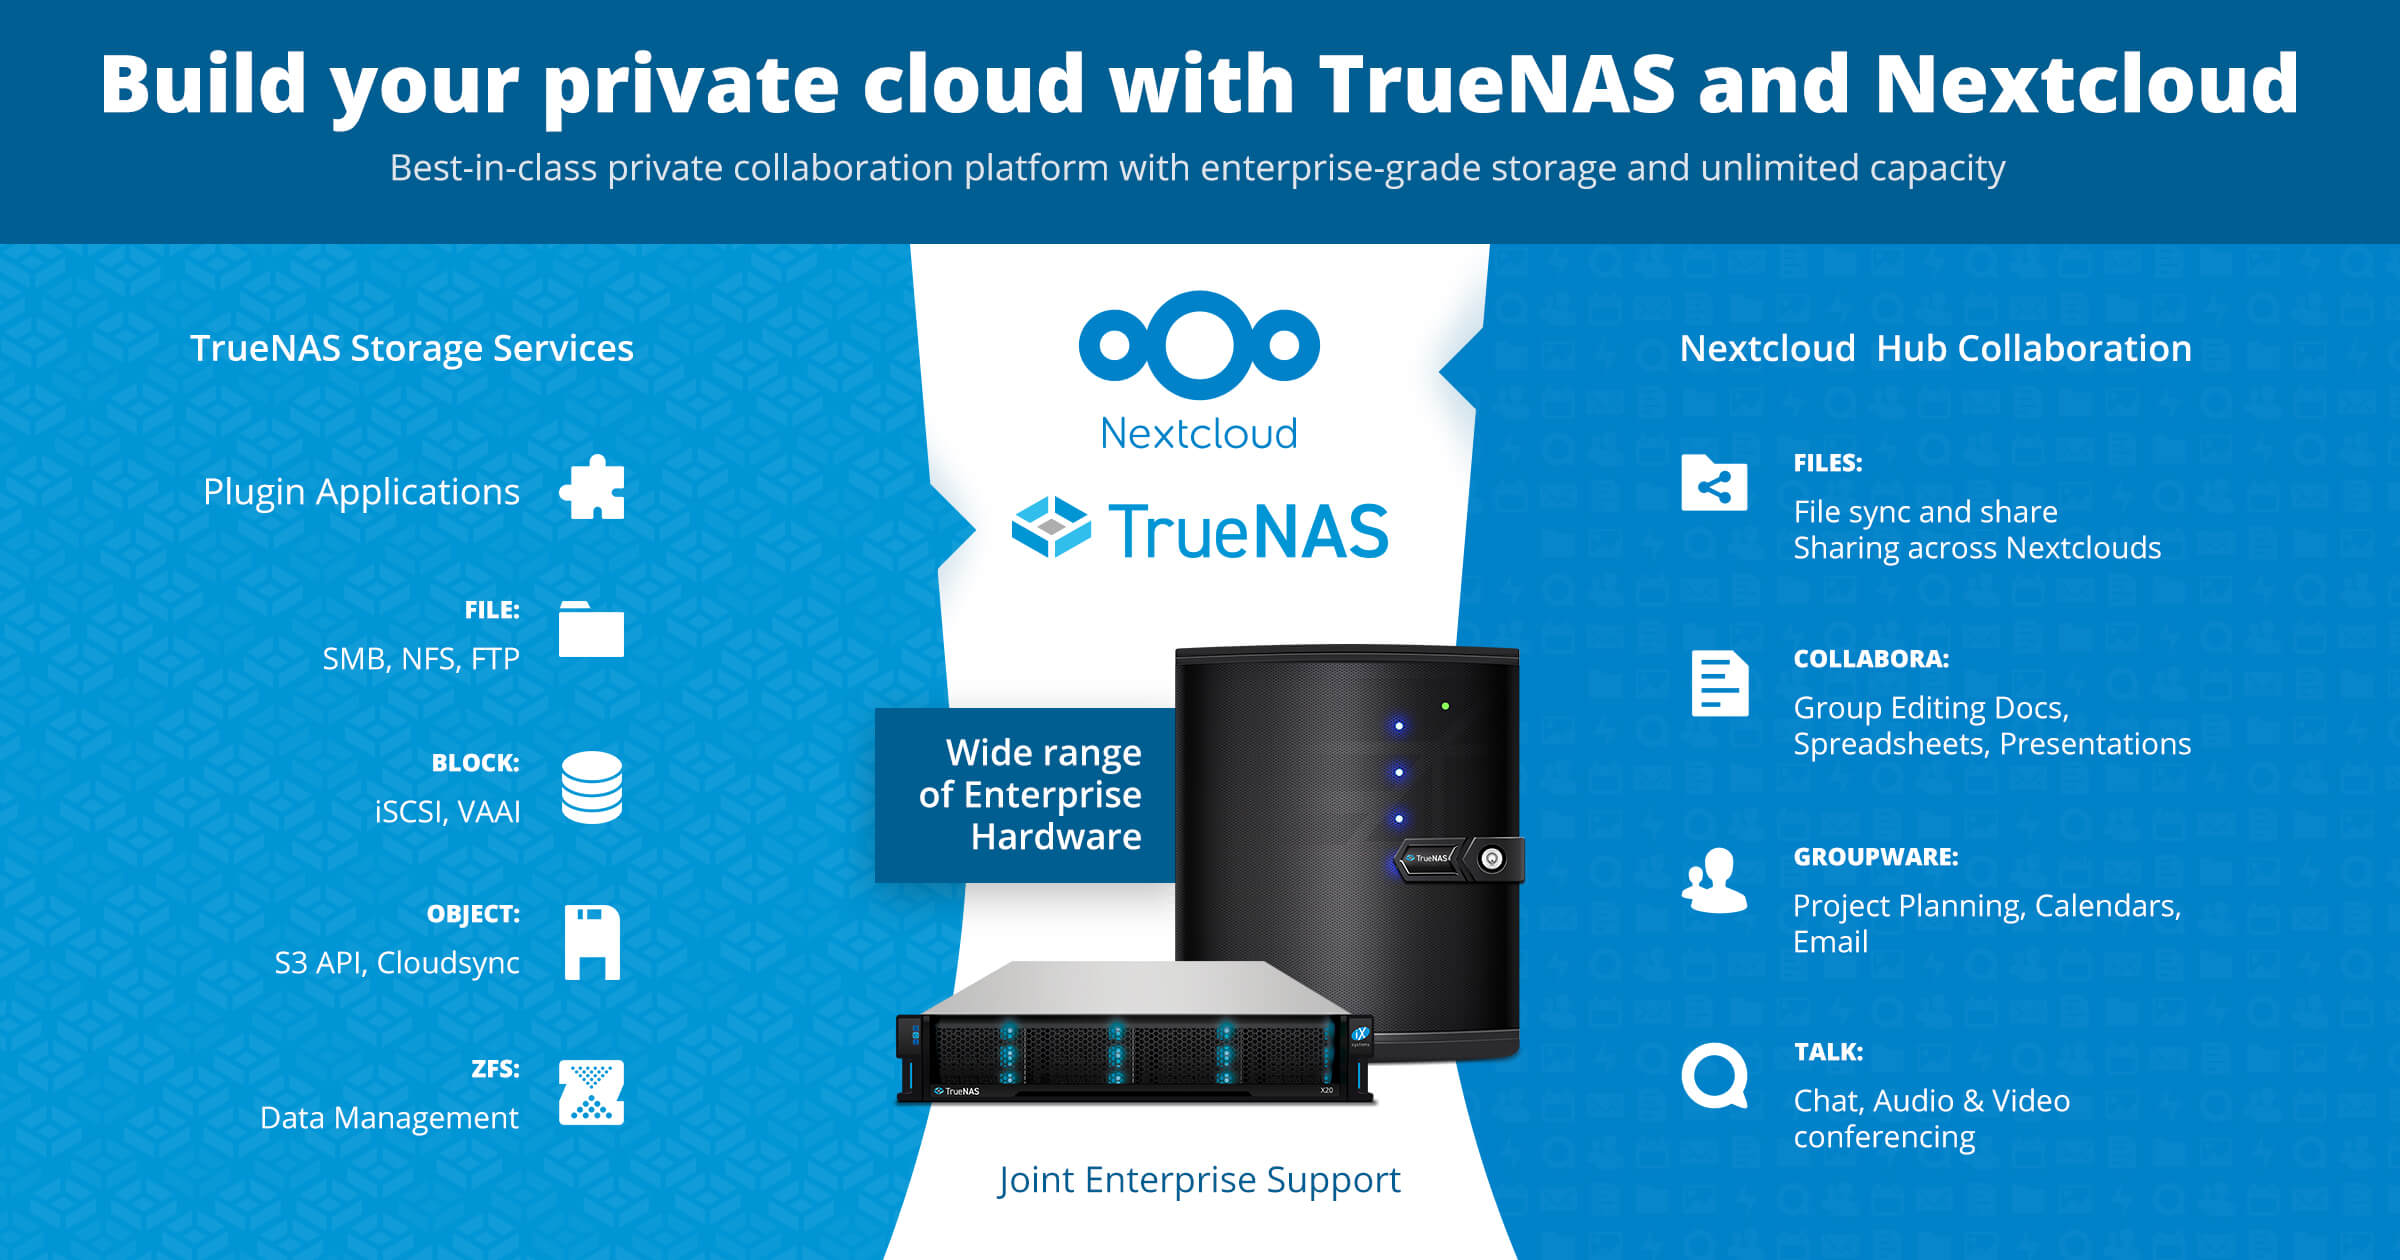 Nextcloud and TrueNAS logos with icons for apps and capabilities of both platforms